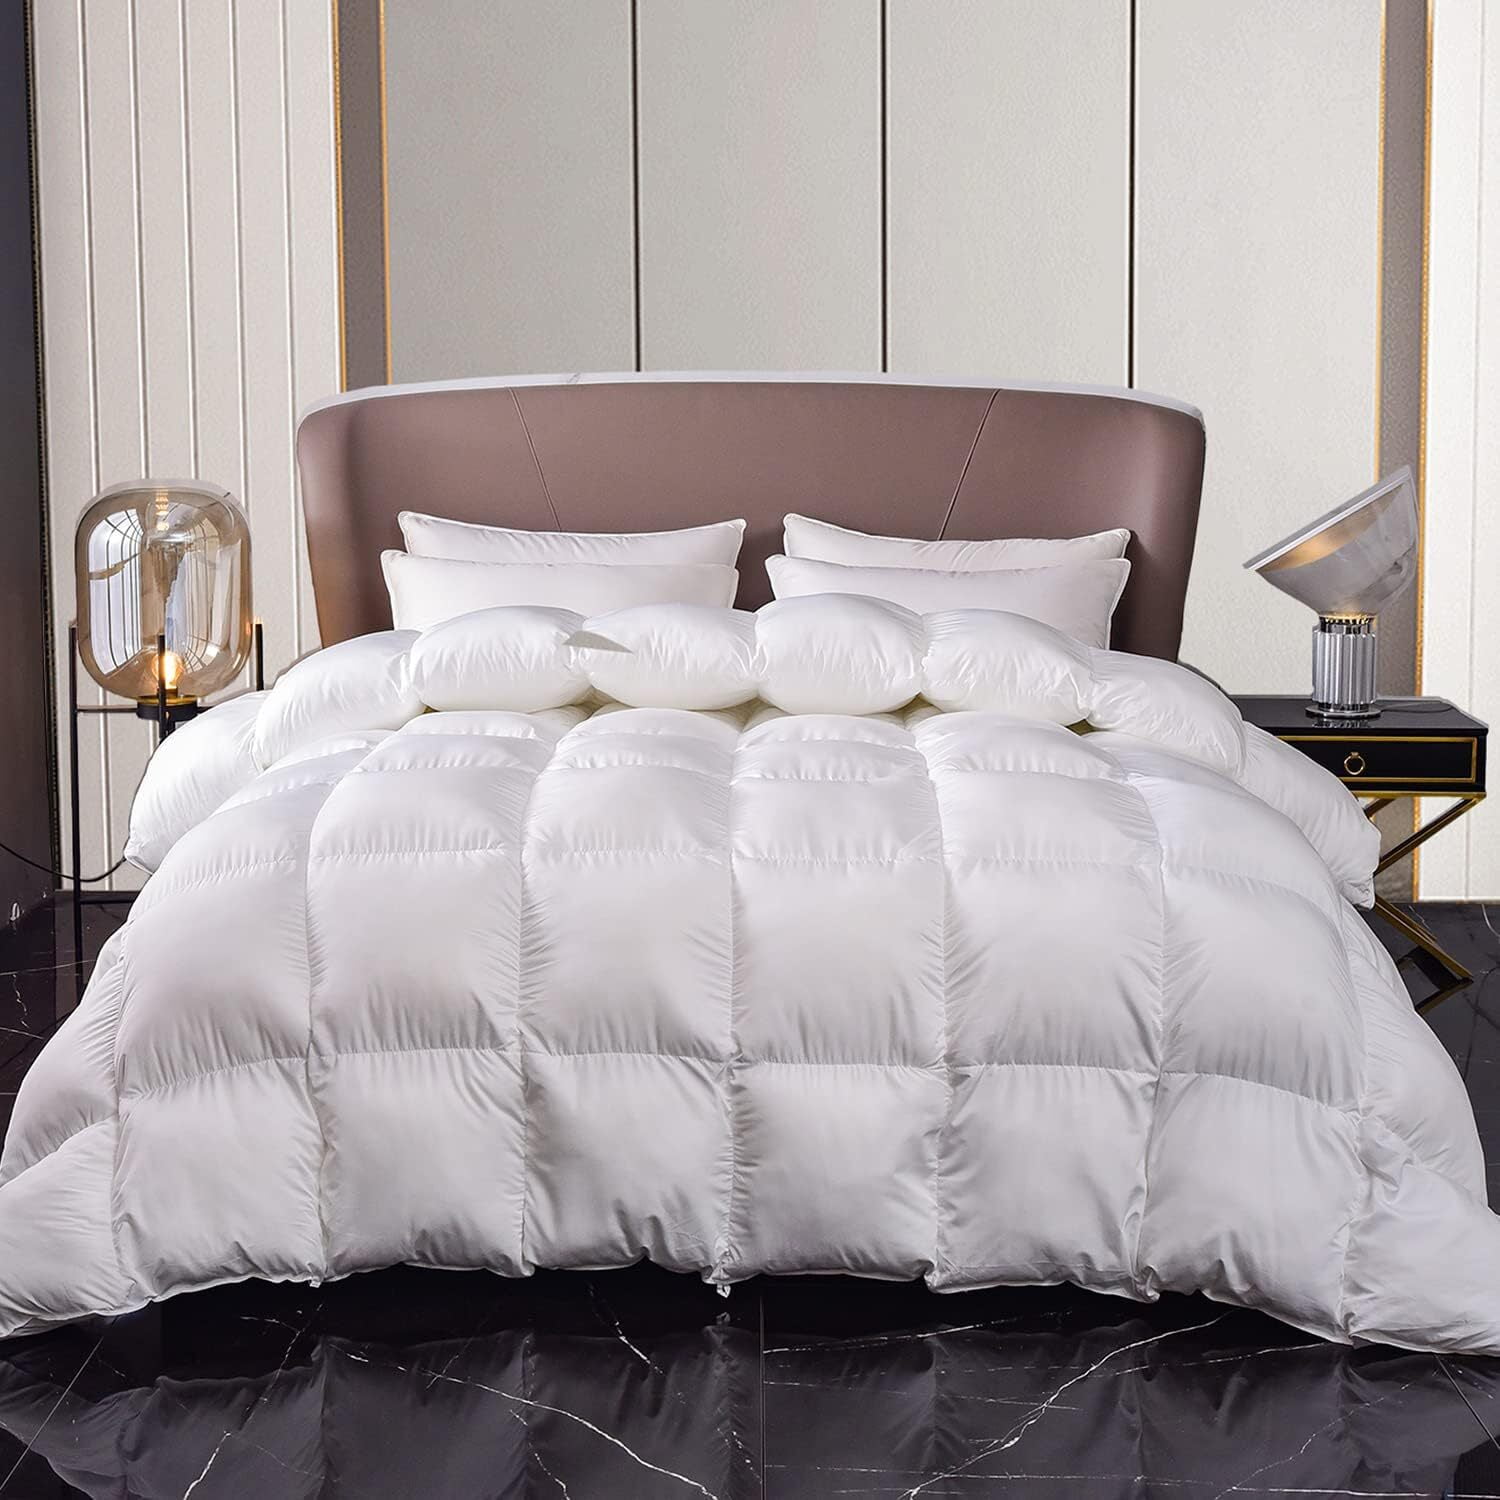 Byourbed Coma Inducer Comforter - Charcoal - King